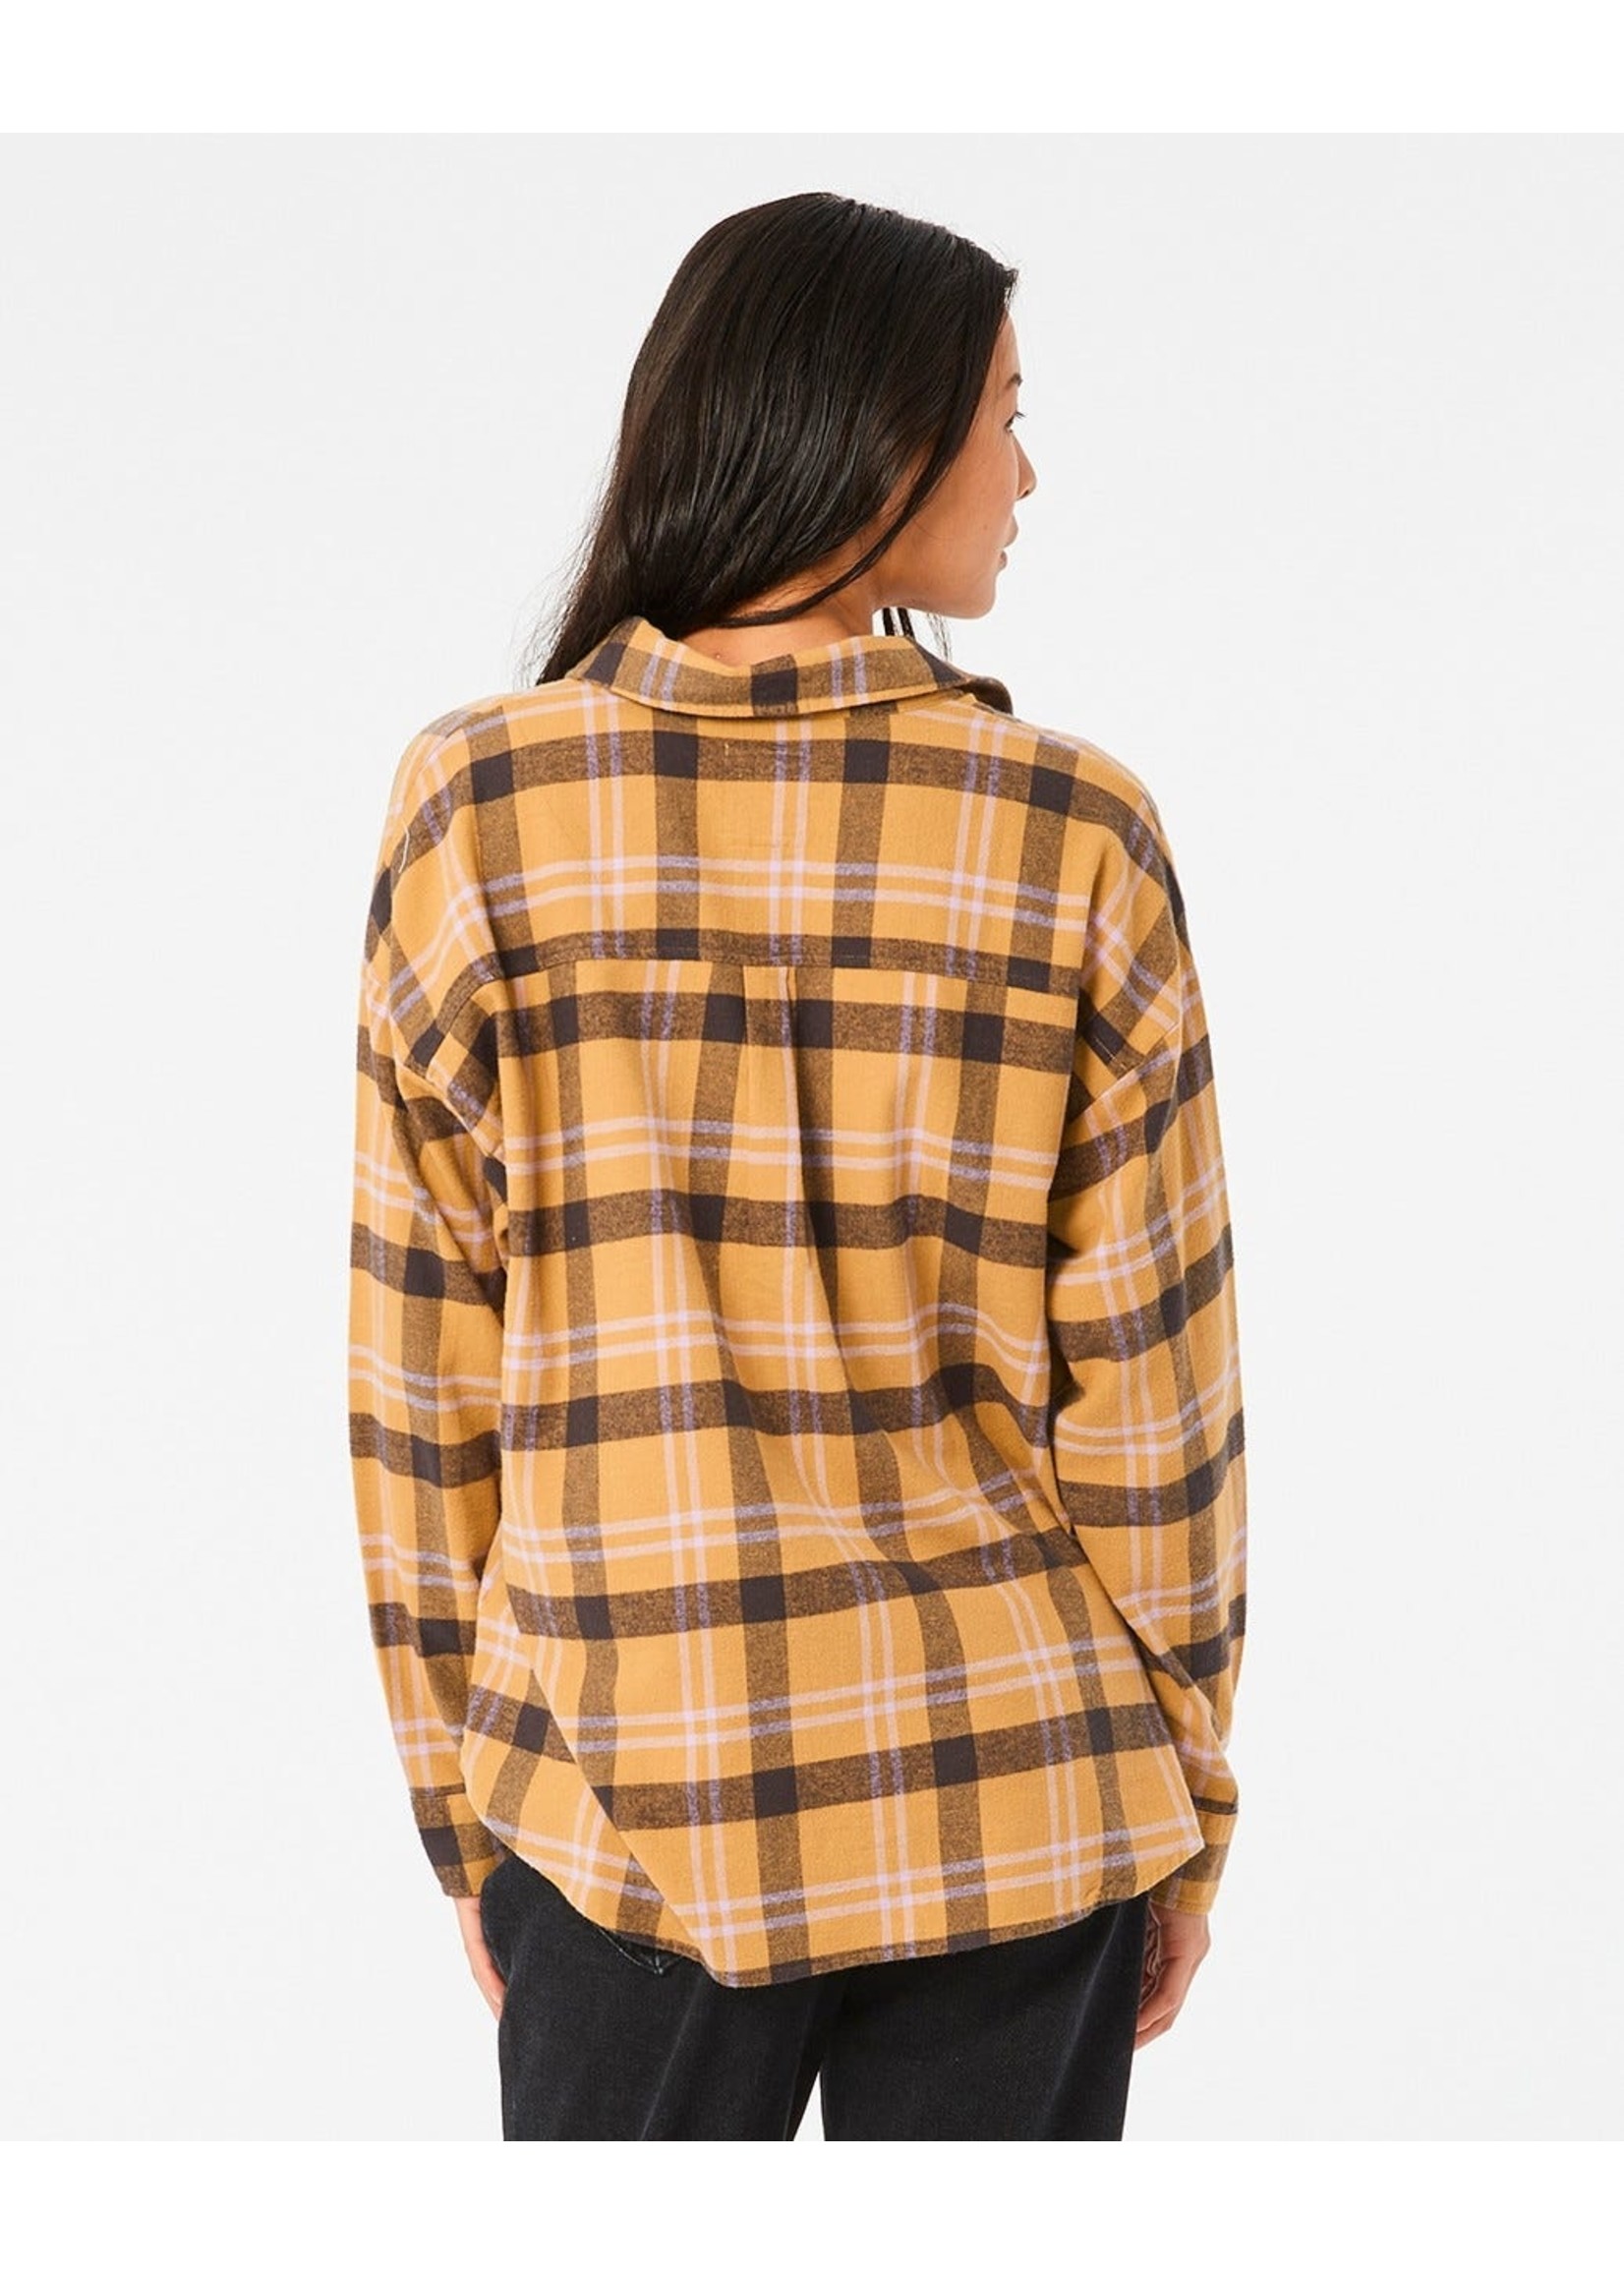 Rip Curl Sunday Flannel